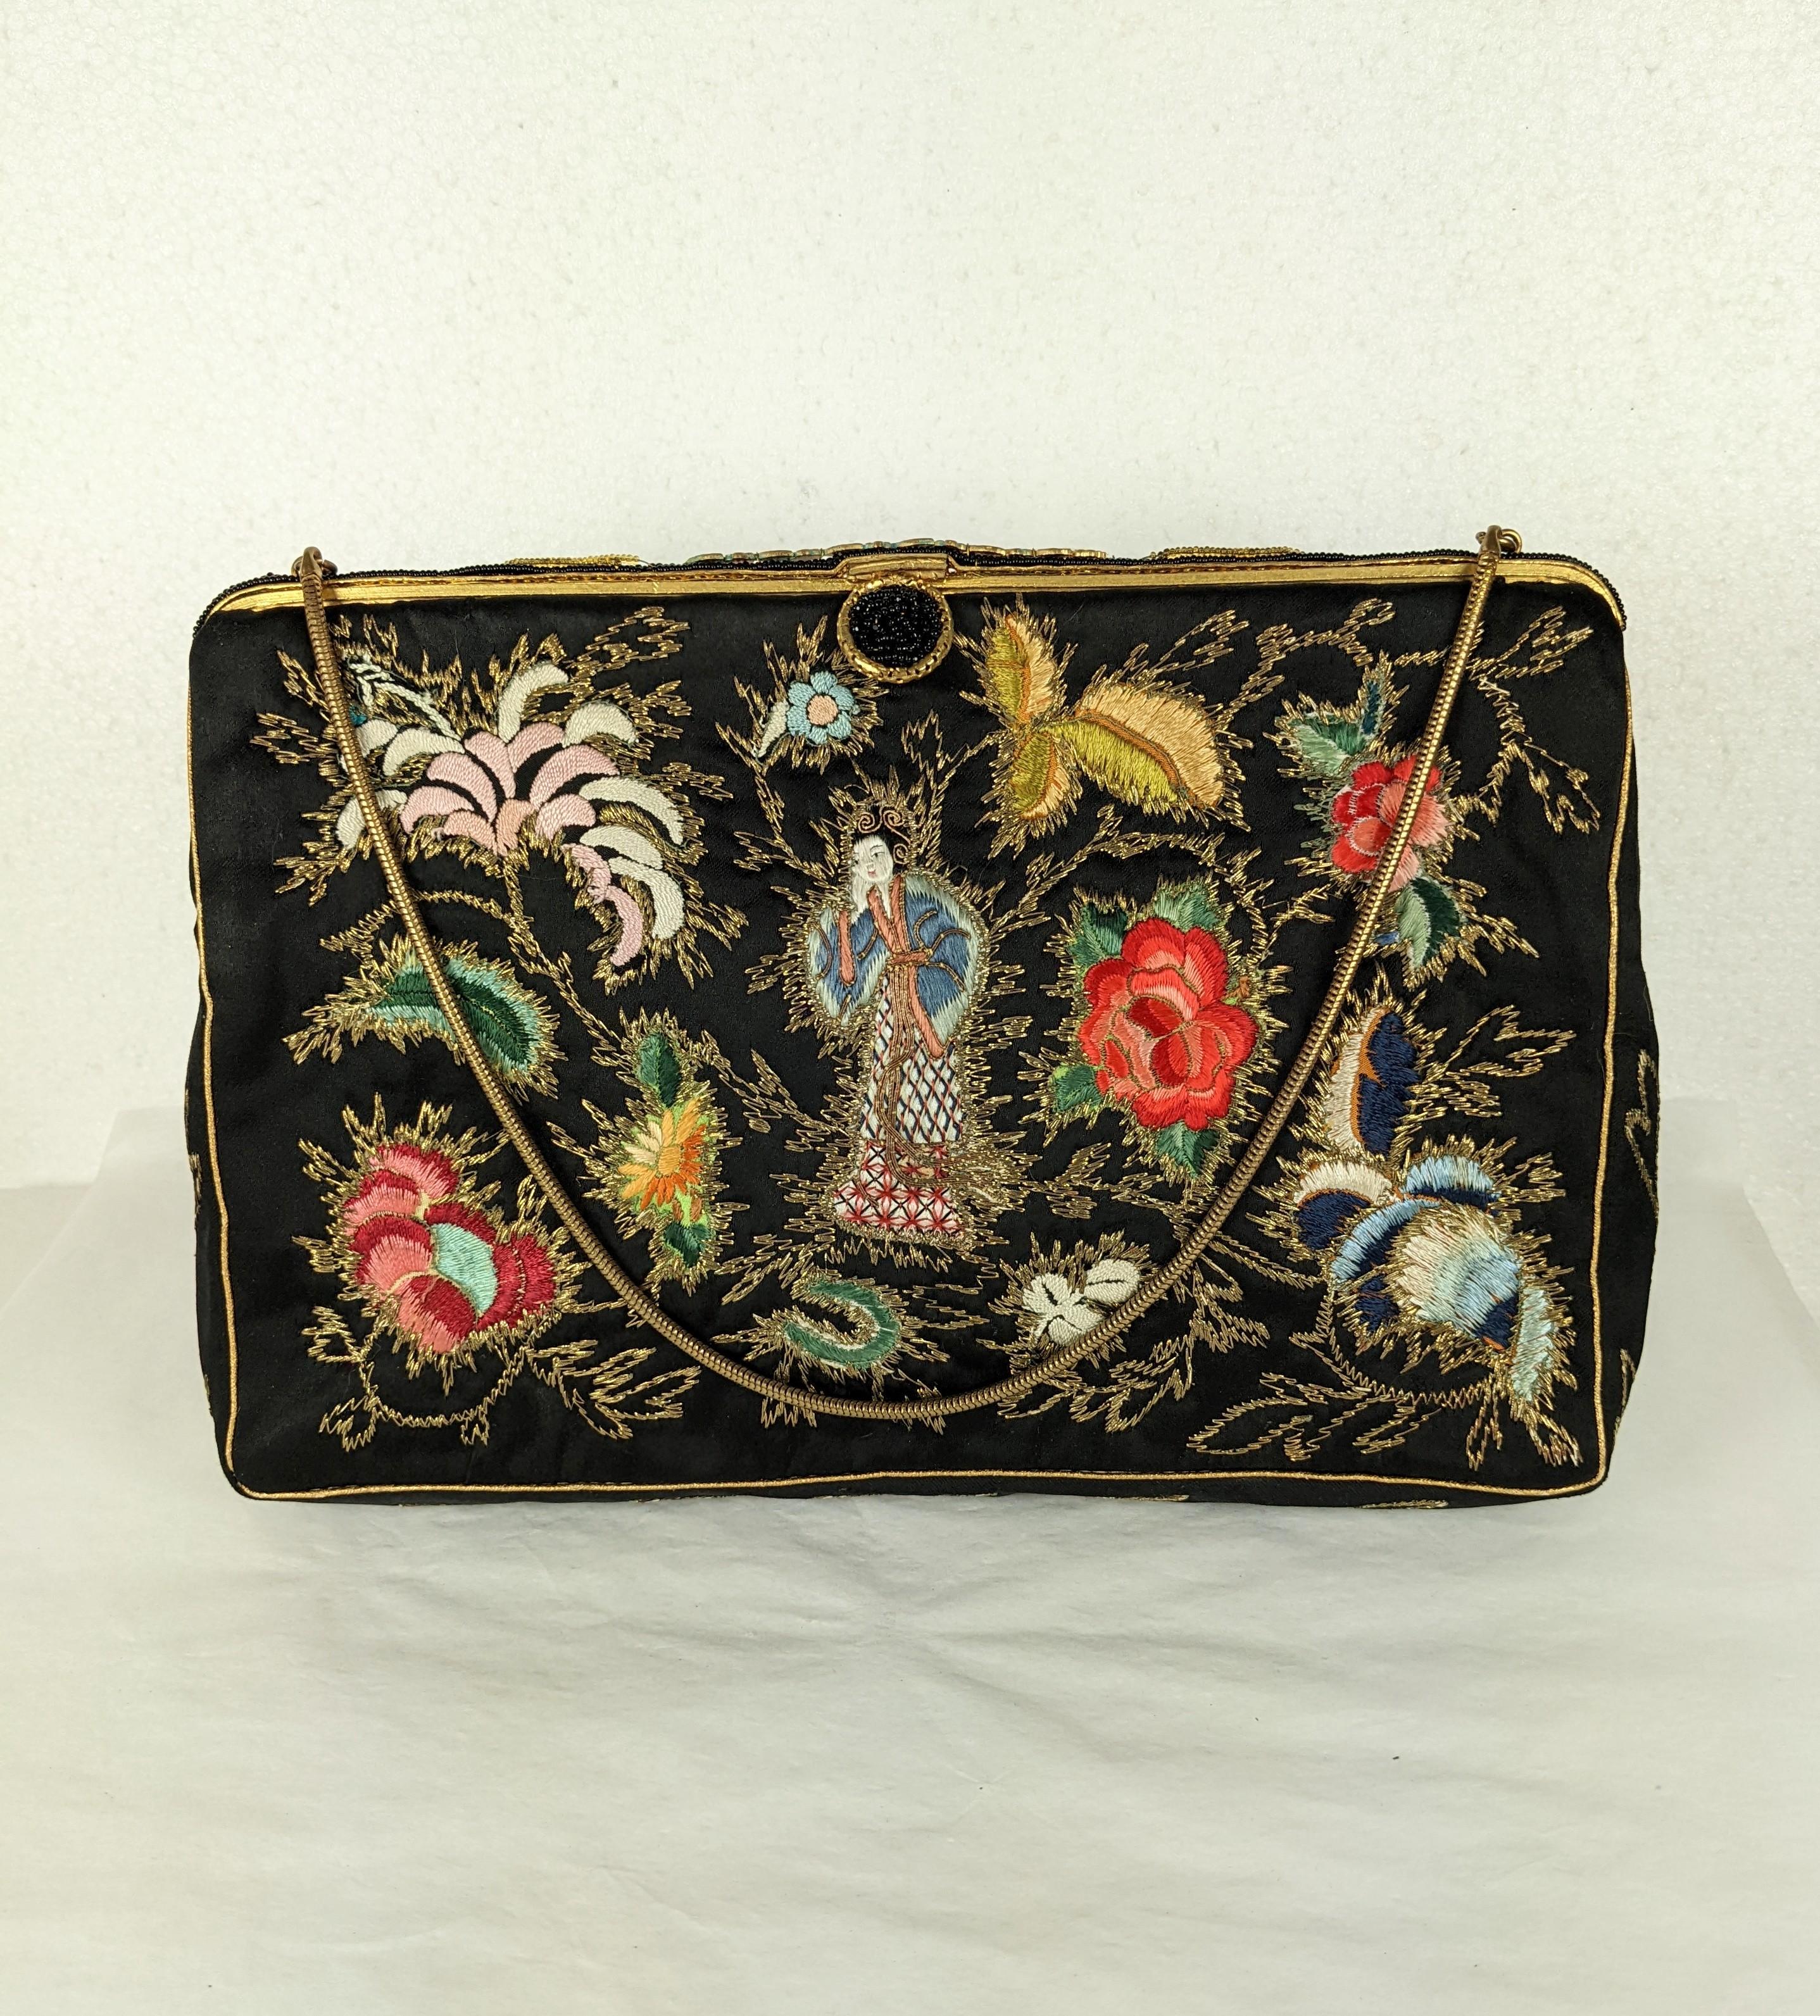 embroidered clutch bag uk